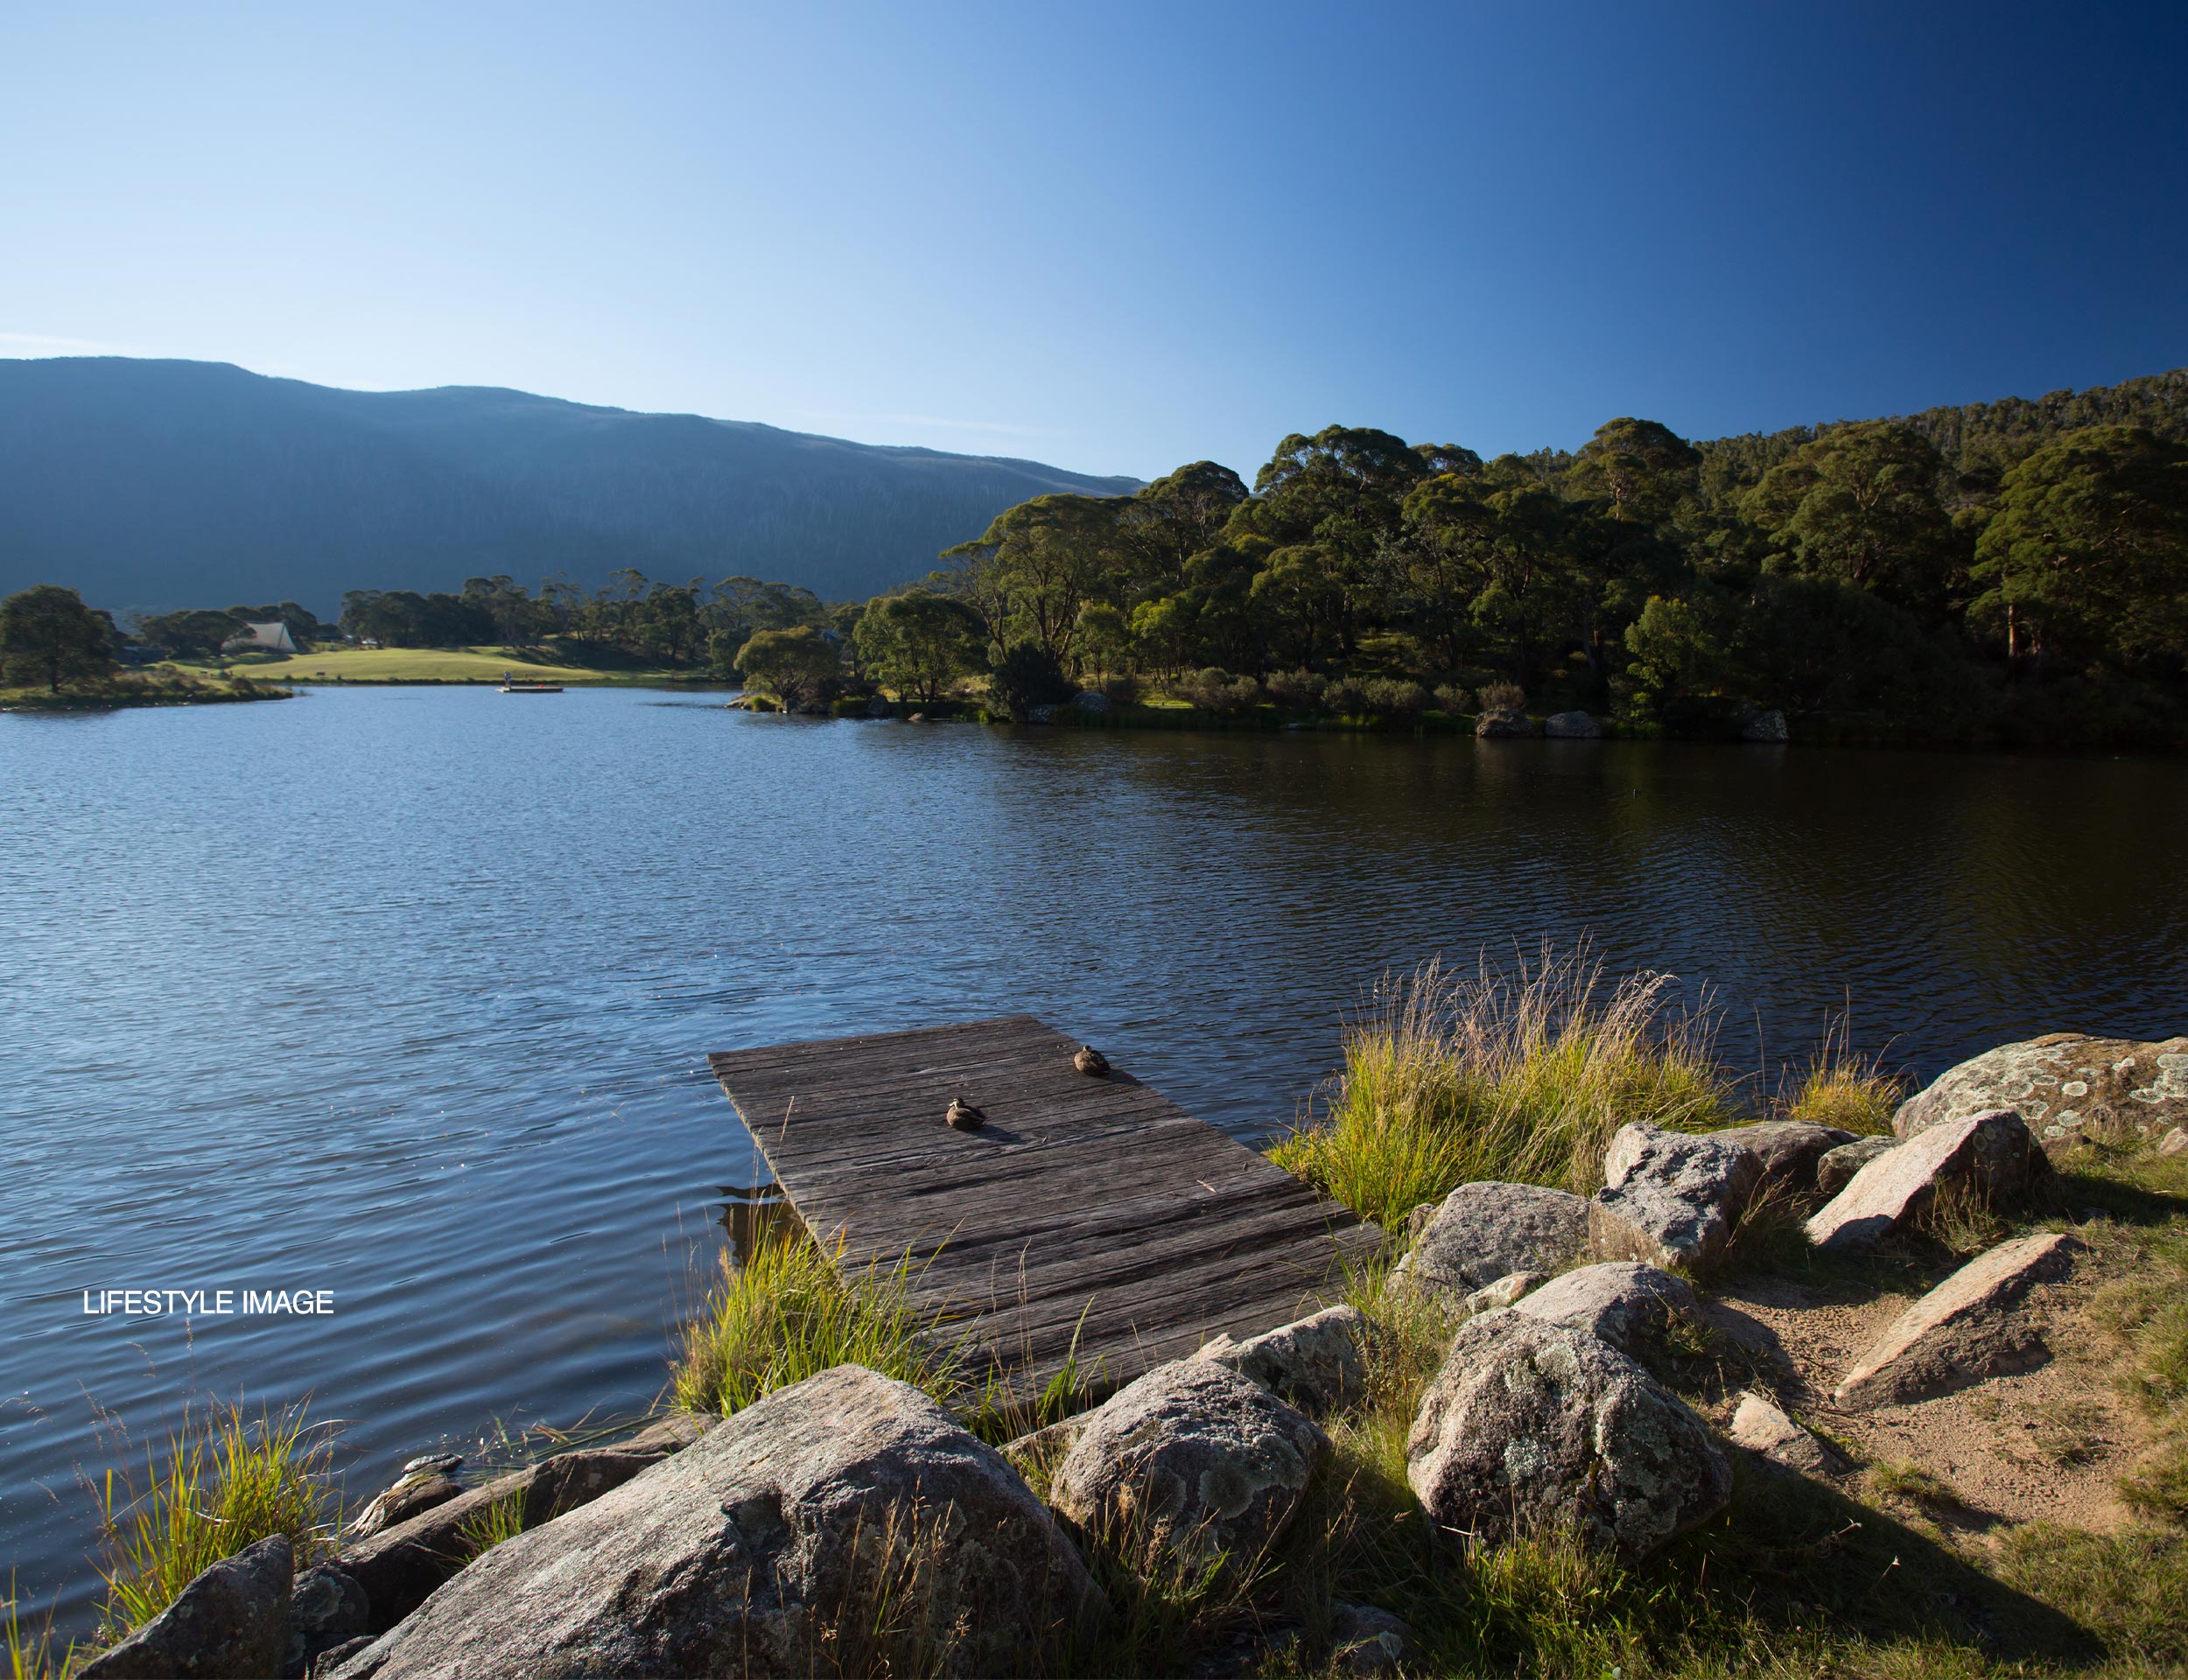 199sqm of Lake Crackenback Land For Sale – Offers Invited Over $230,000